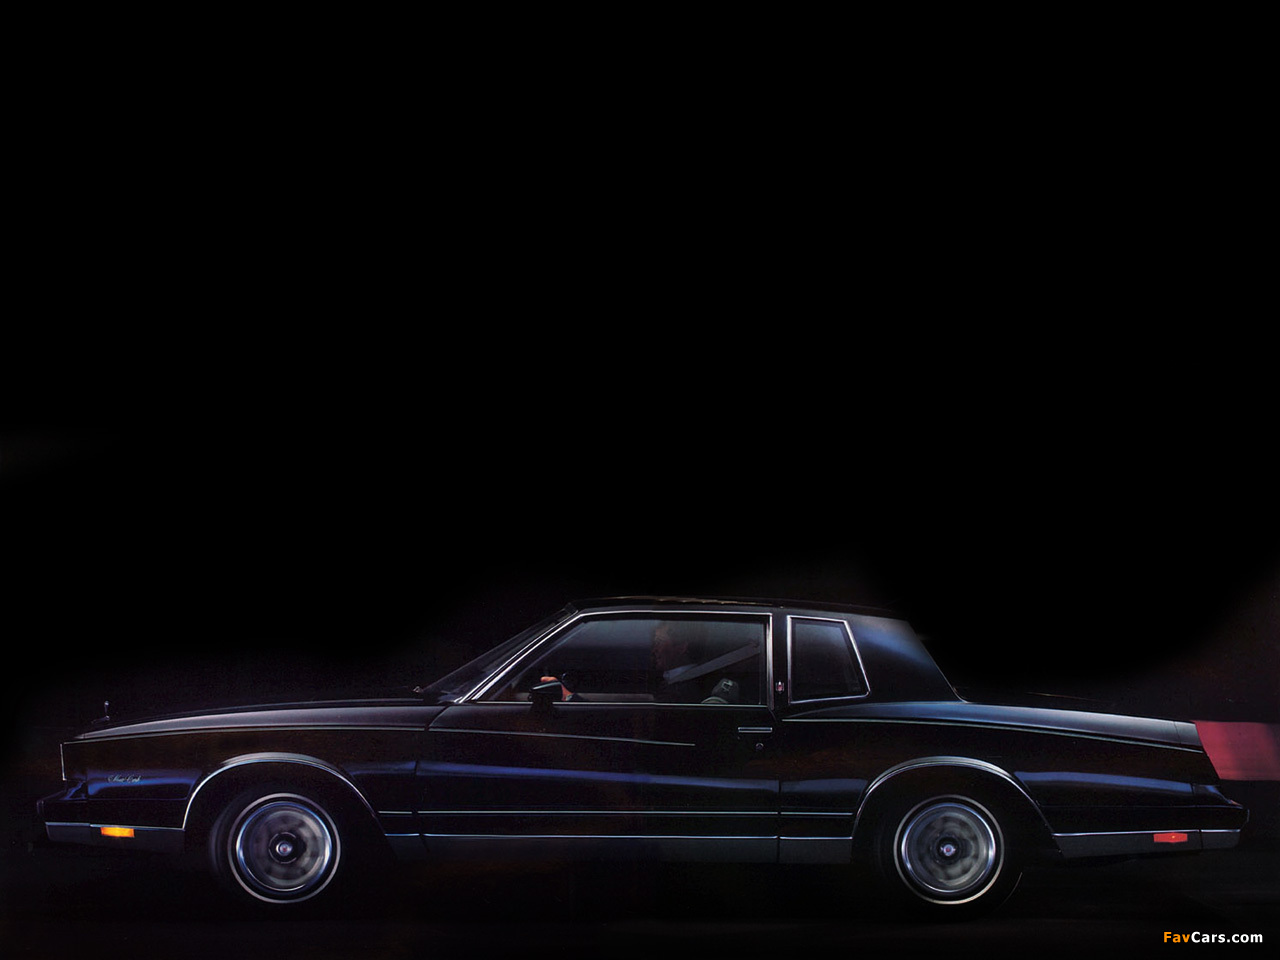 Chevrolet Monte Carlo Ss Wallpapers